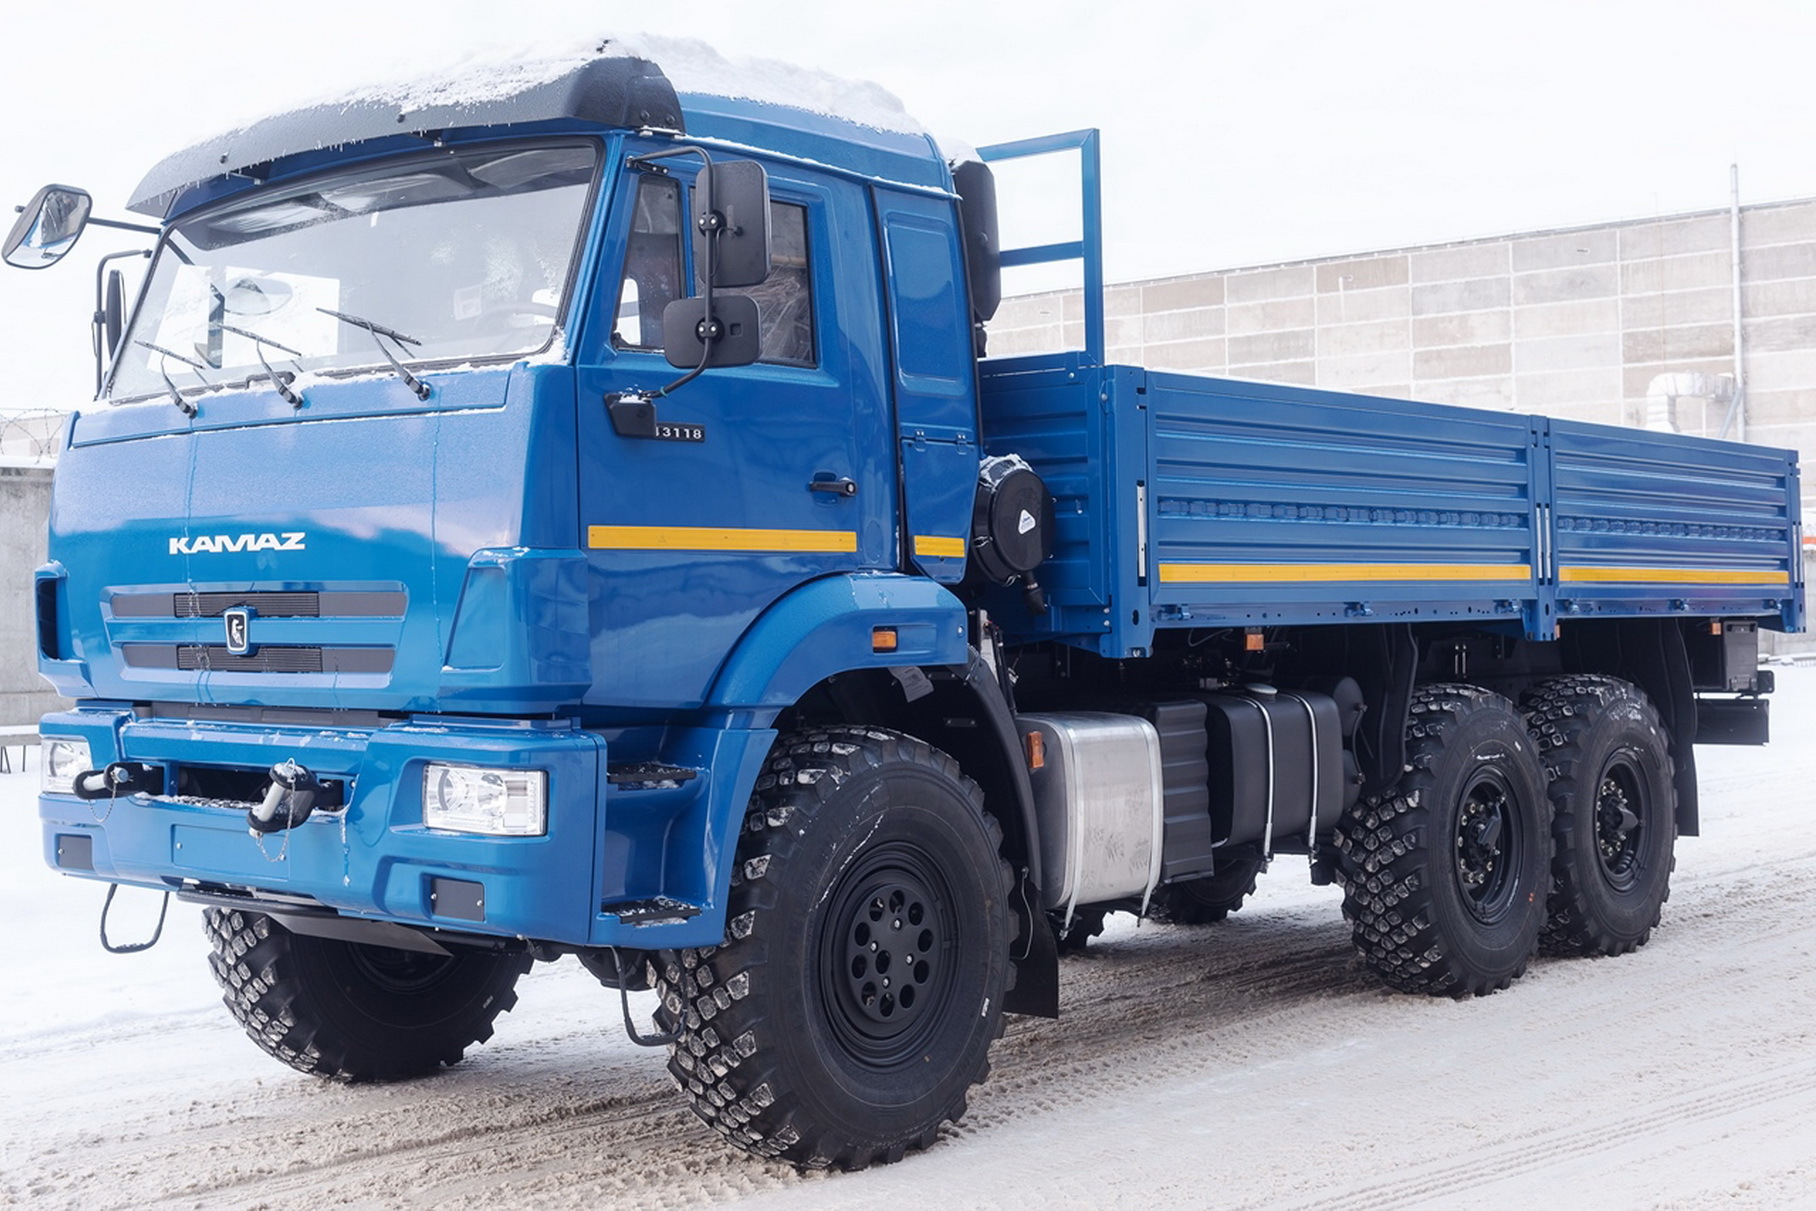 KamAZ assembled the first domestic automatic machine for heavy trucks